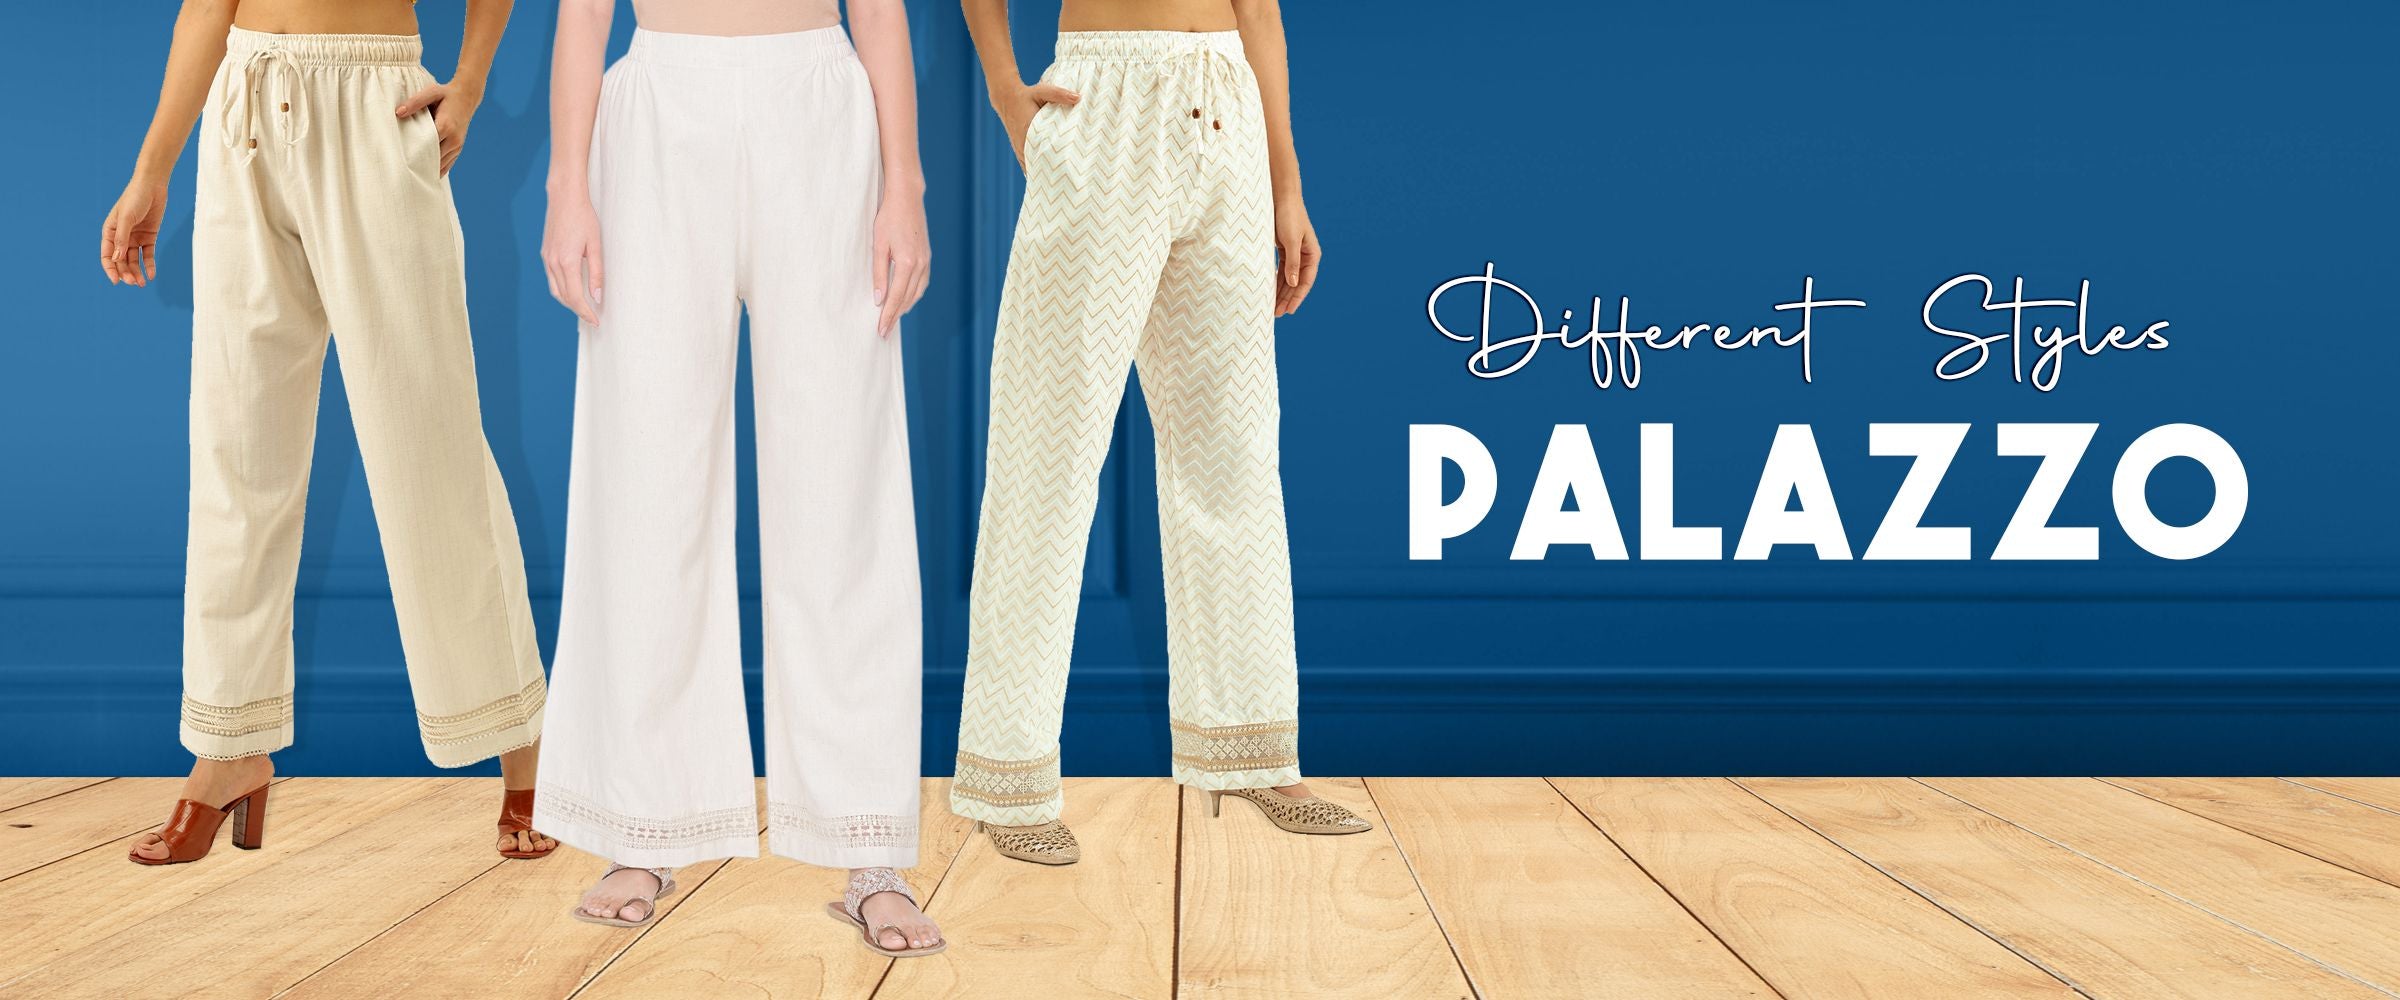 How should I style parallel pants or palazzos for a Western look? - Quora